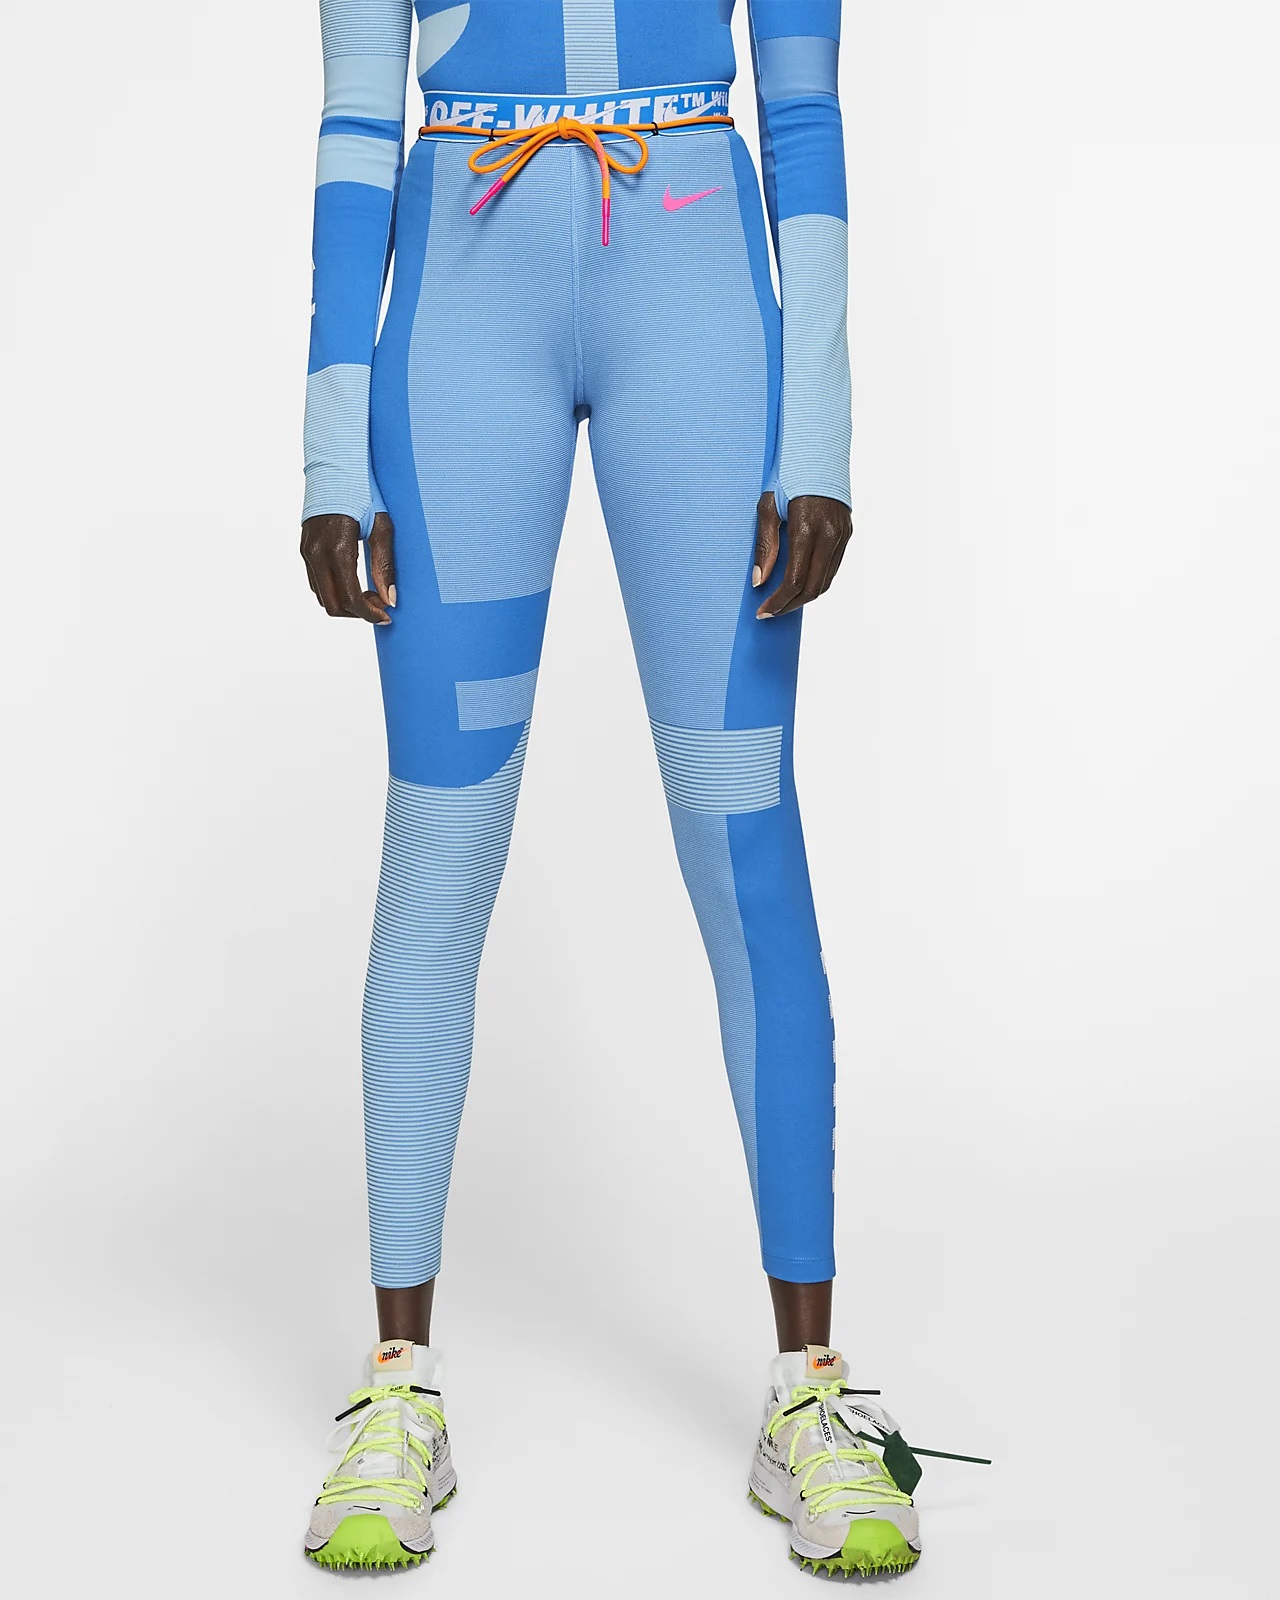 Nike And Off-White Release 'Athlete In Progress' Tights And Top | SNOBETTE1280 x 1600